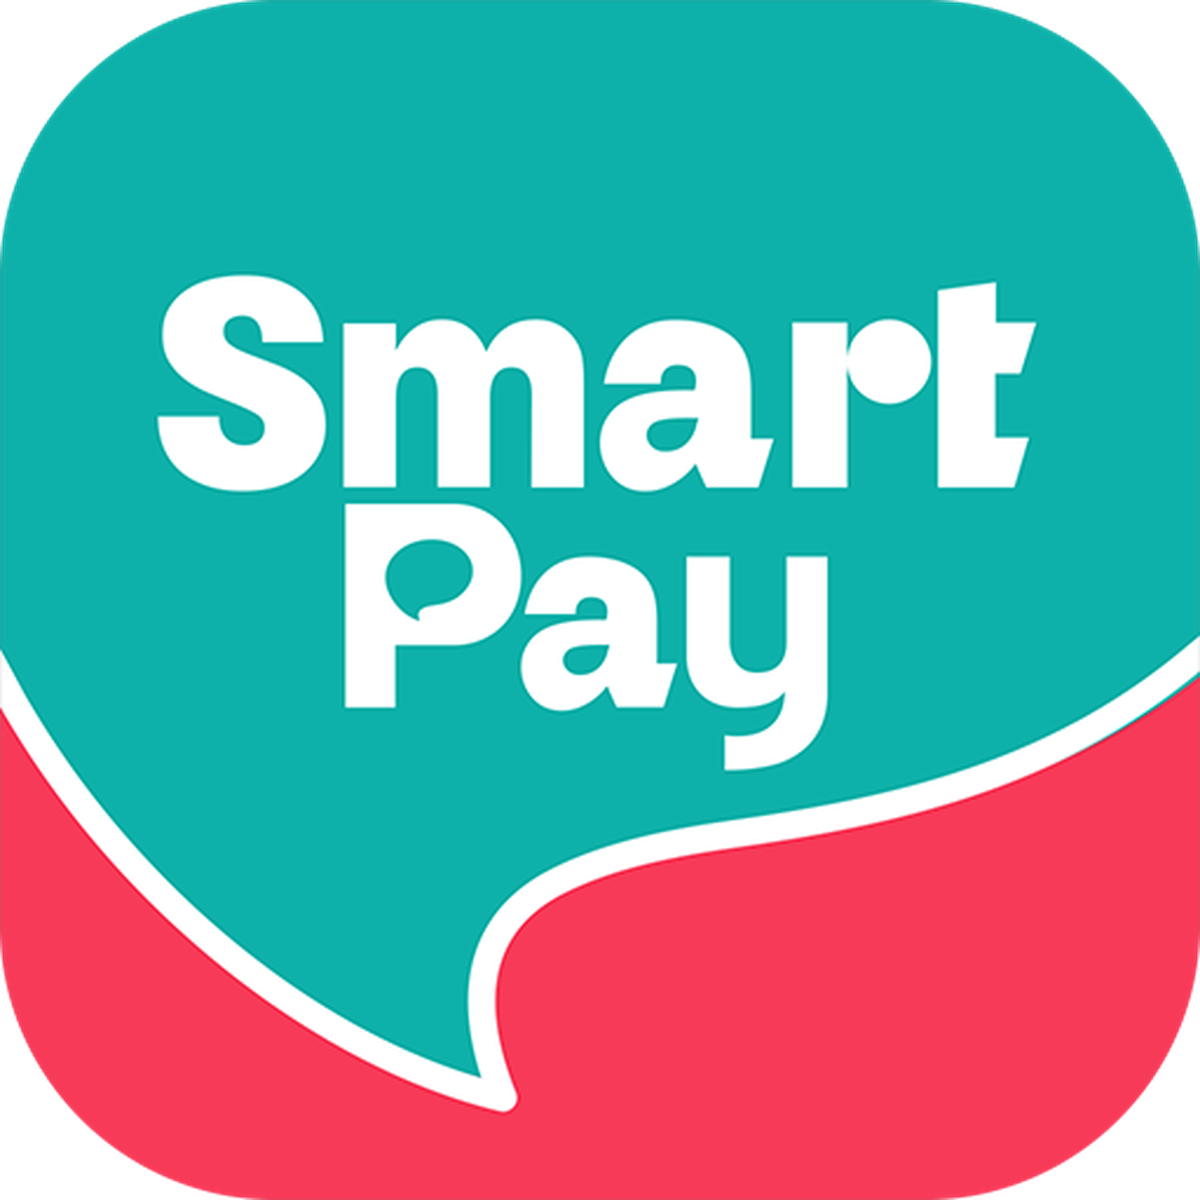 Smart pay. SMARTPAY.